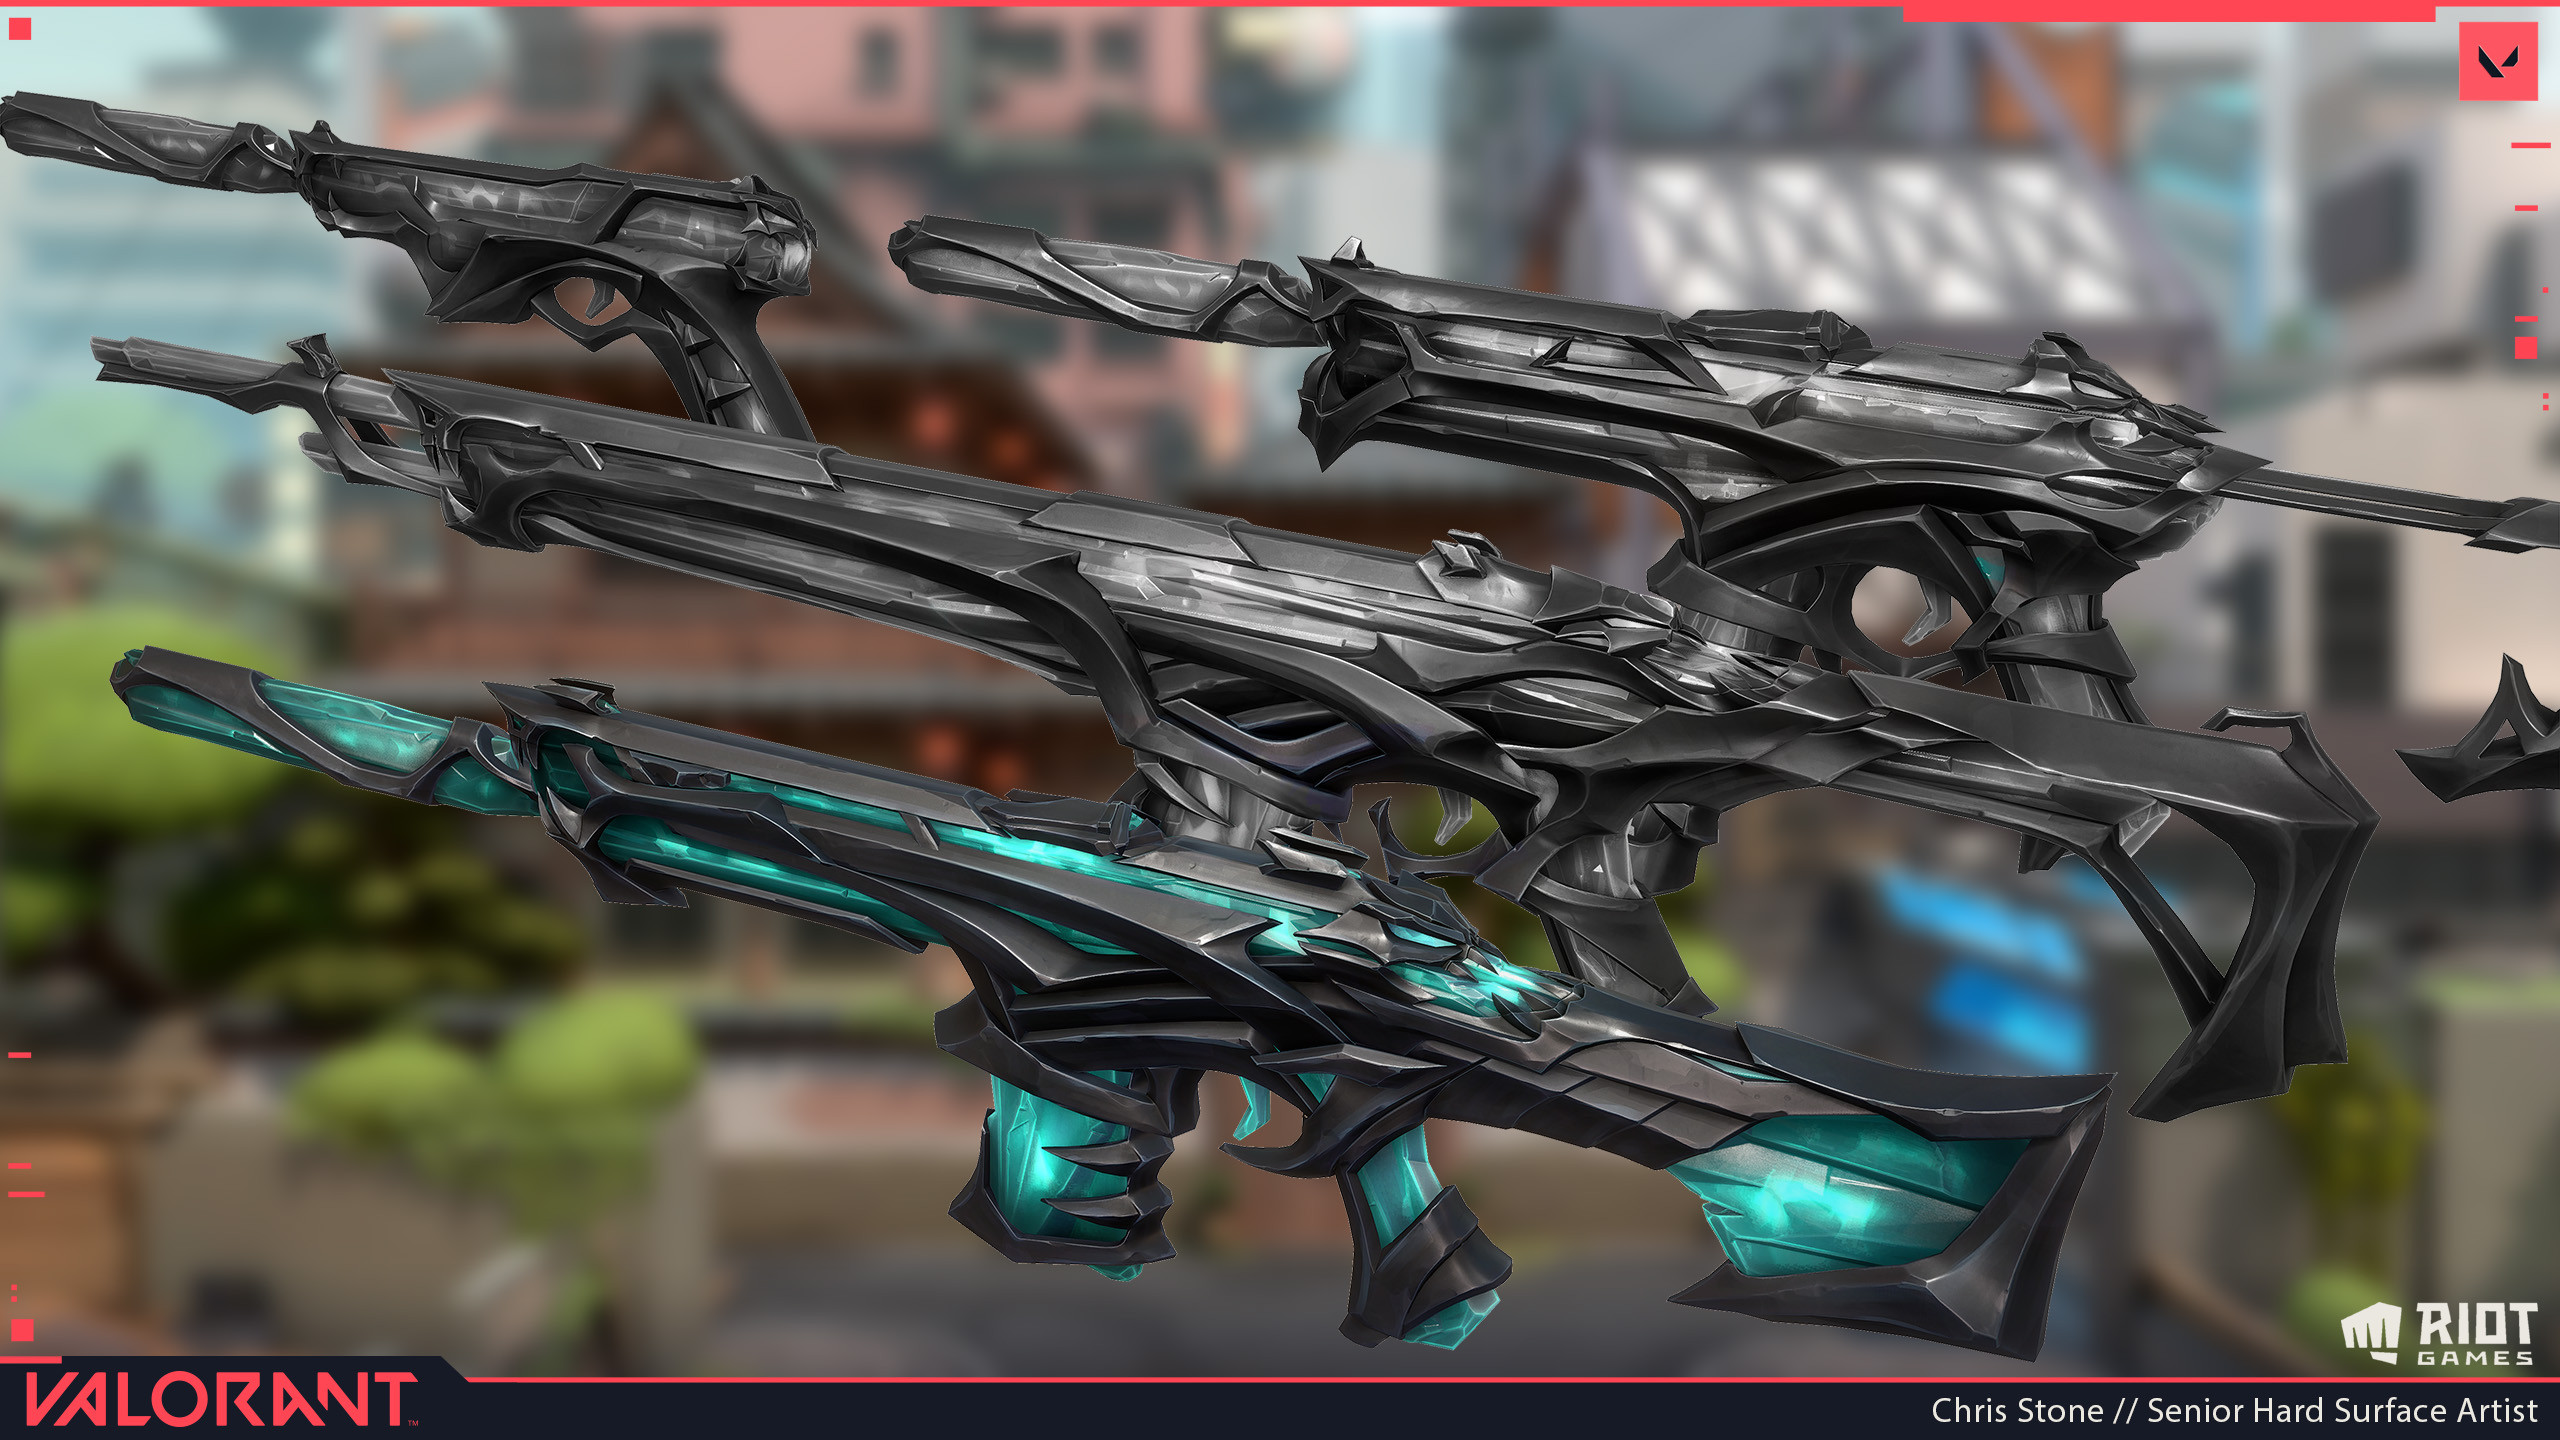 Responsible for the Phantom, Black Mist crystal shader seen on all guns, and worked closely with our Outsource Mangers to oversee and raise the quality bar on the other three guns. 